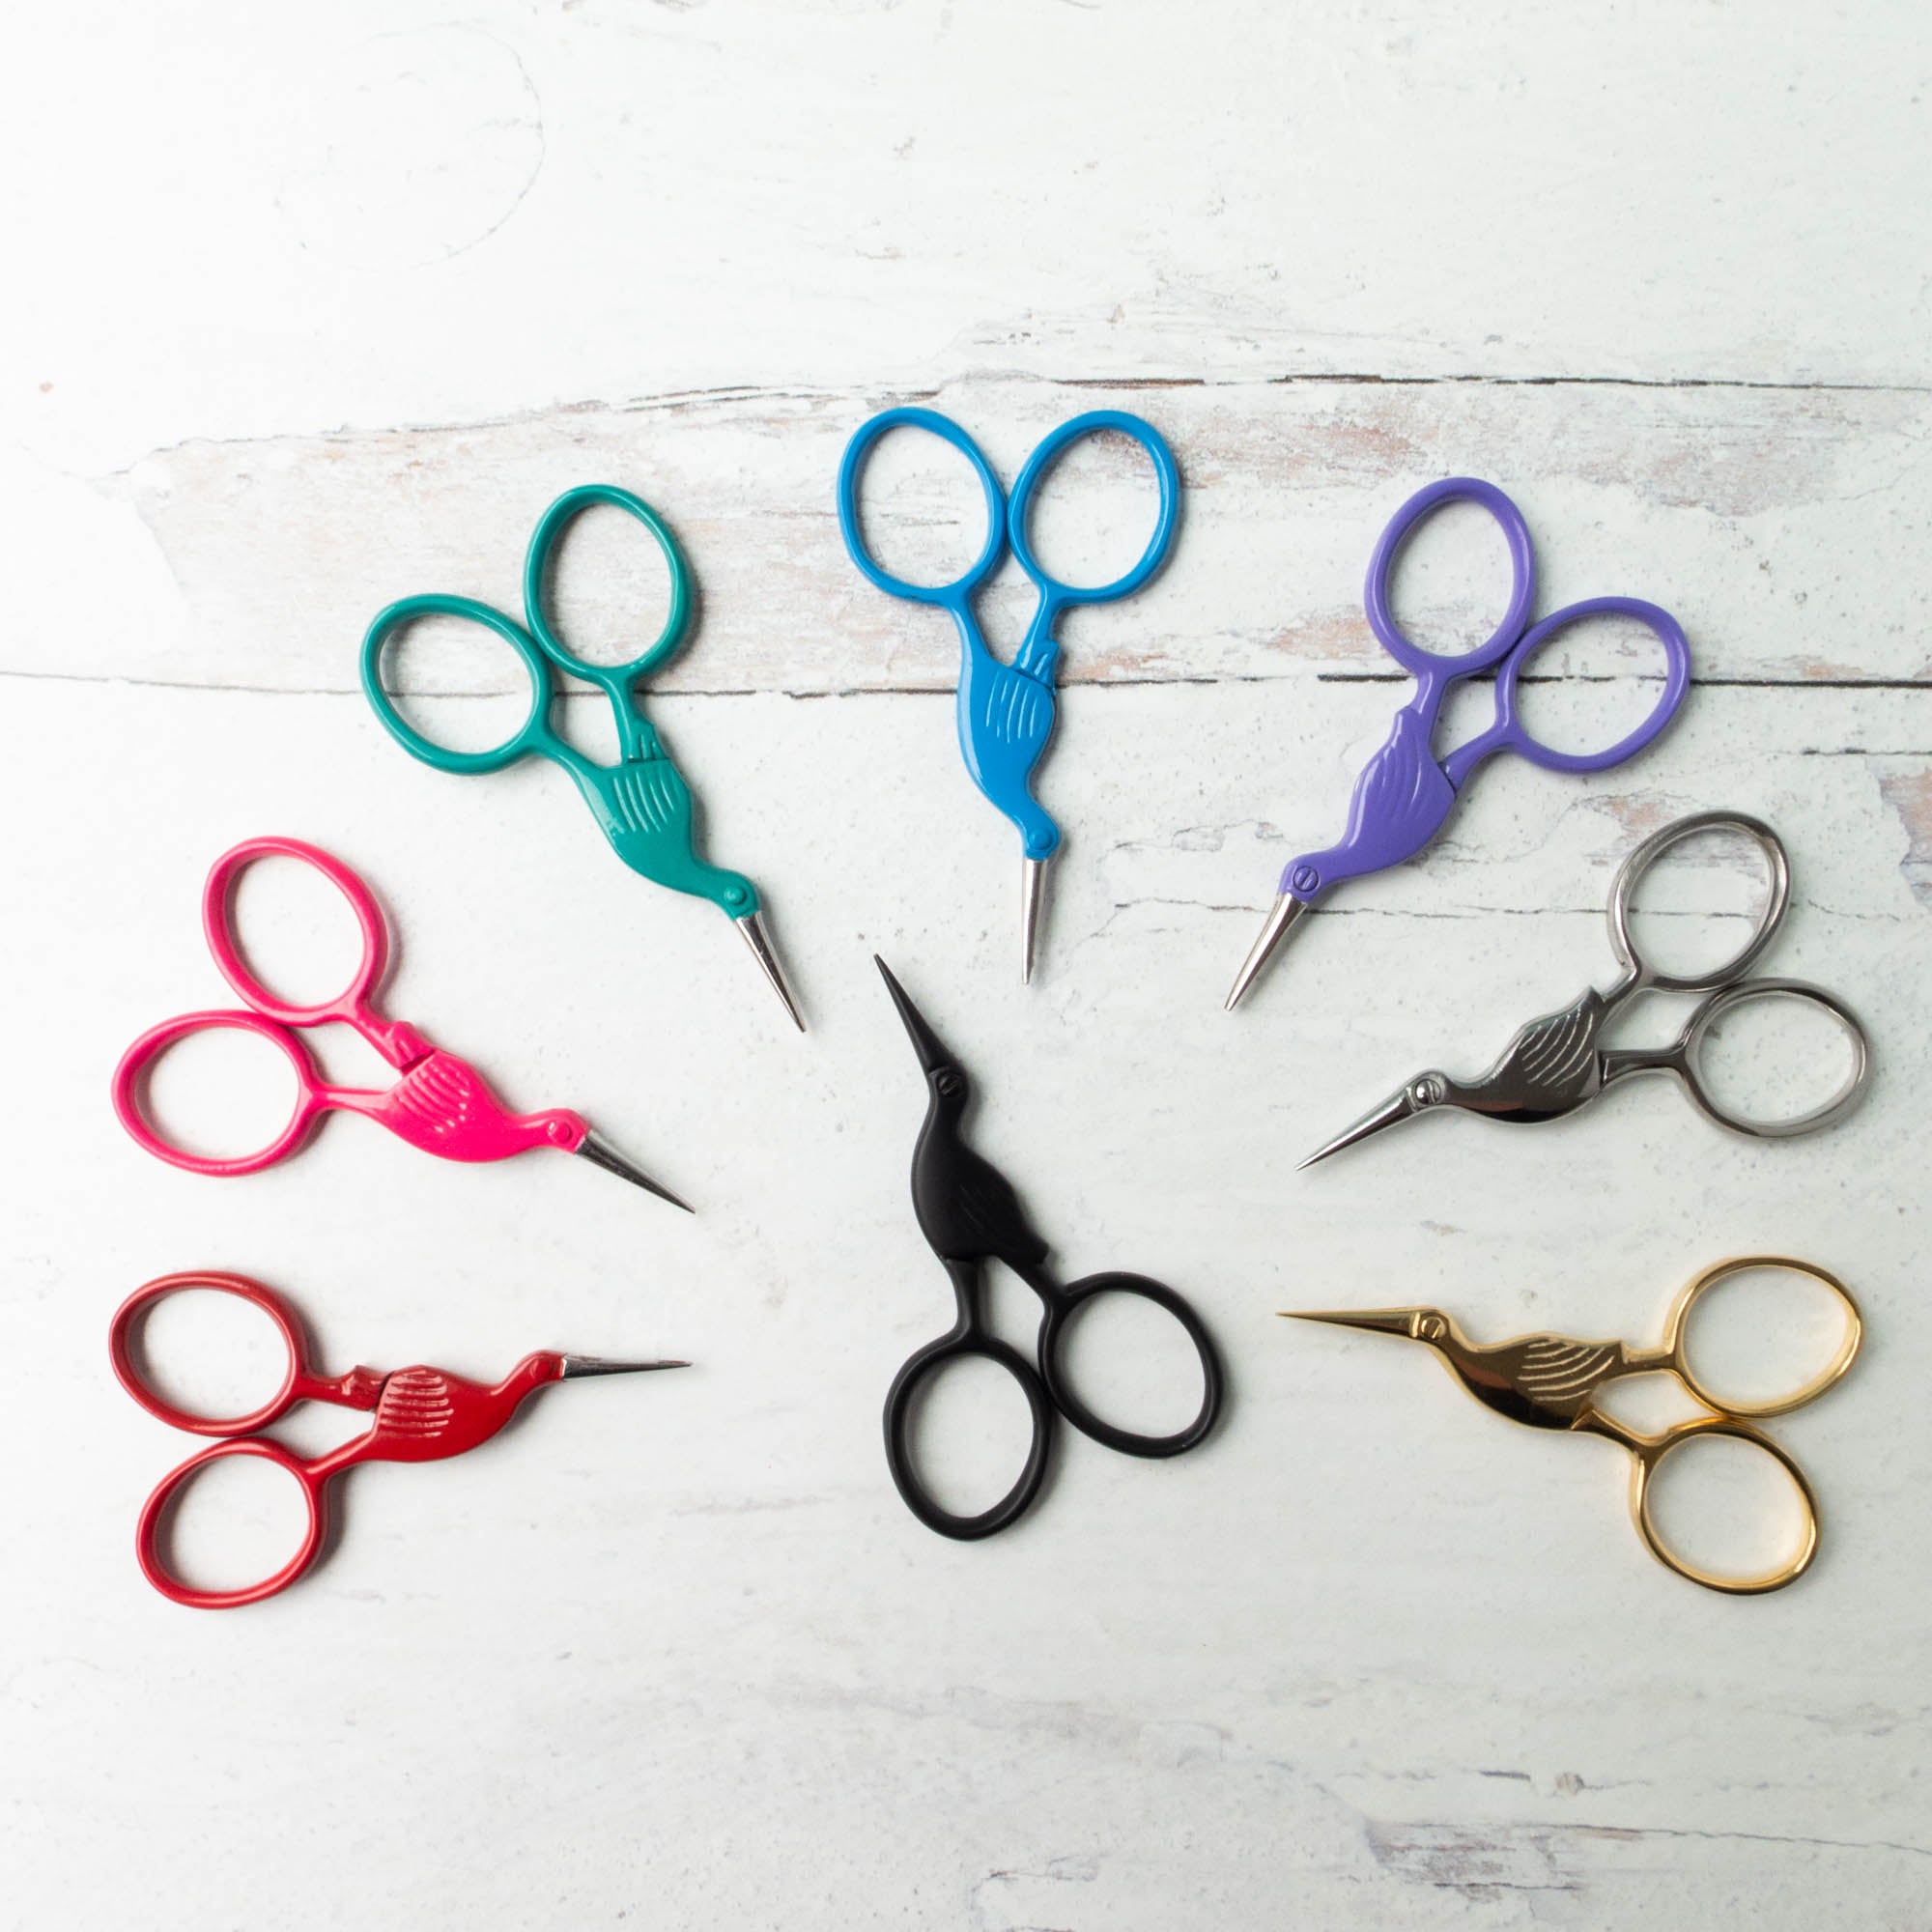 Havel Left-Handed Embroidery Scissors (3.5 inch) – Snuggly Monkey